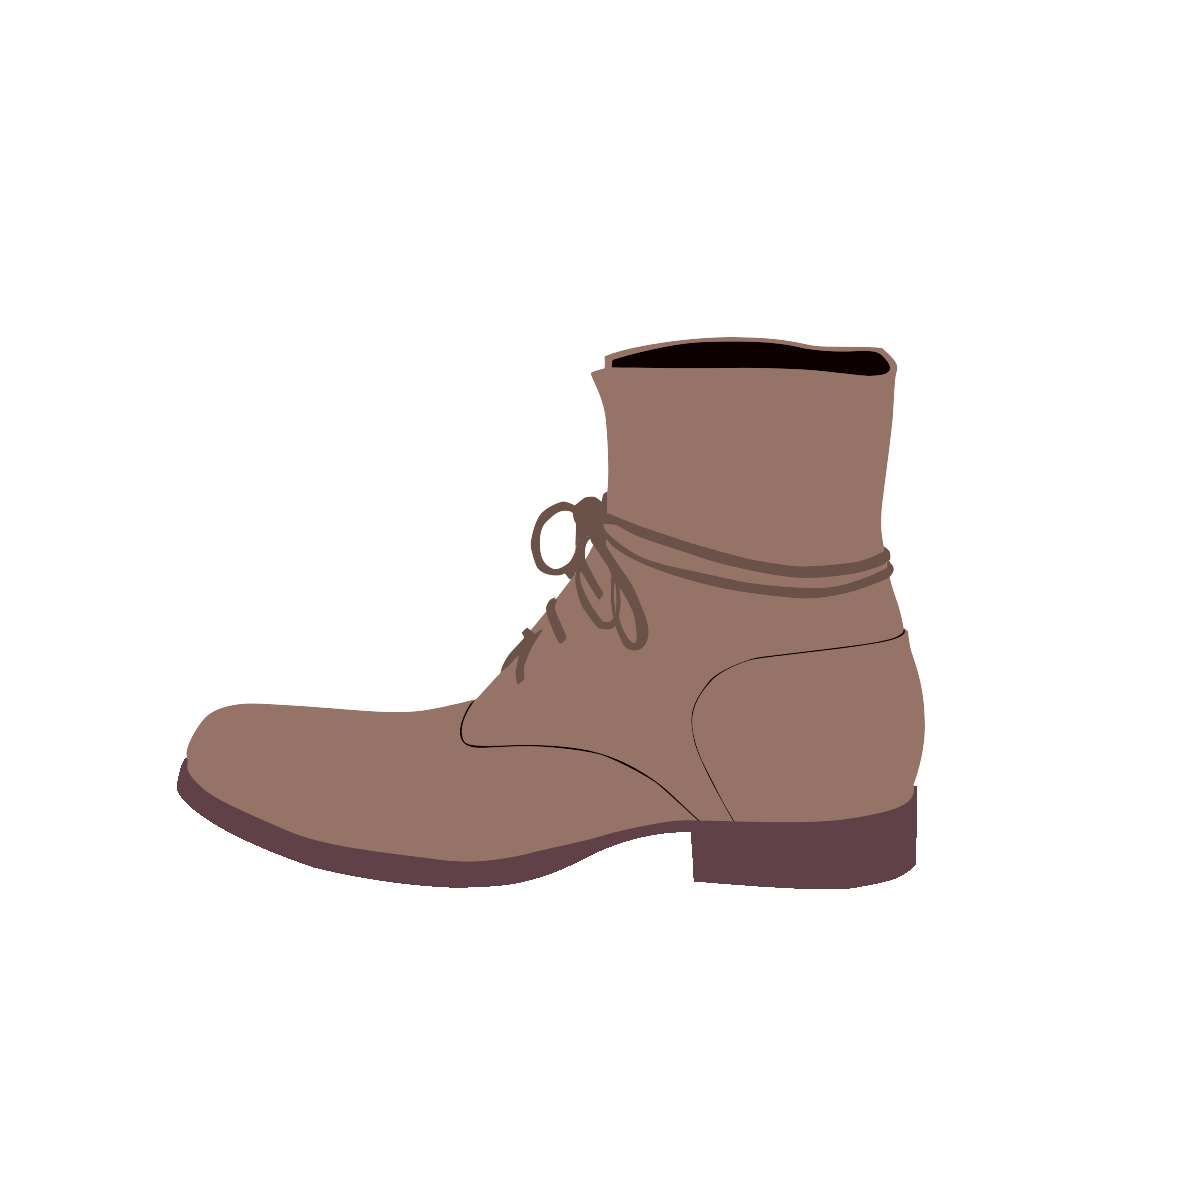 Hipster Boots